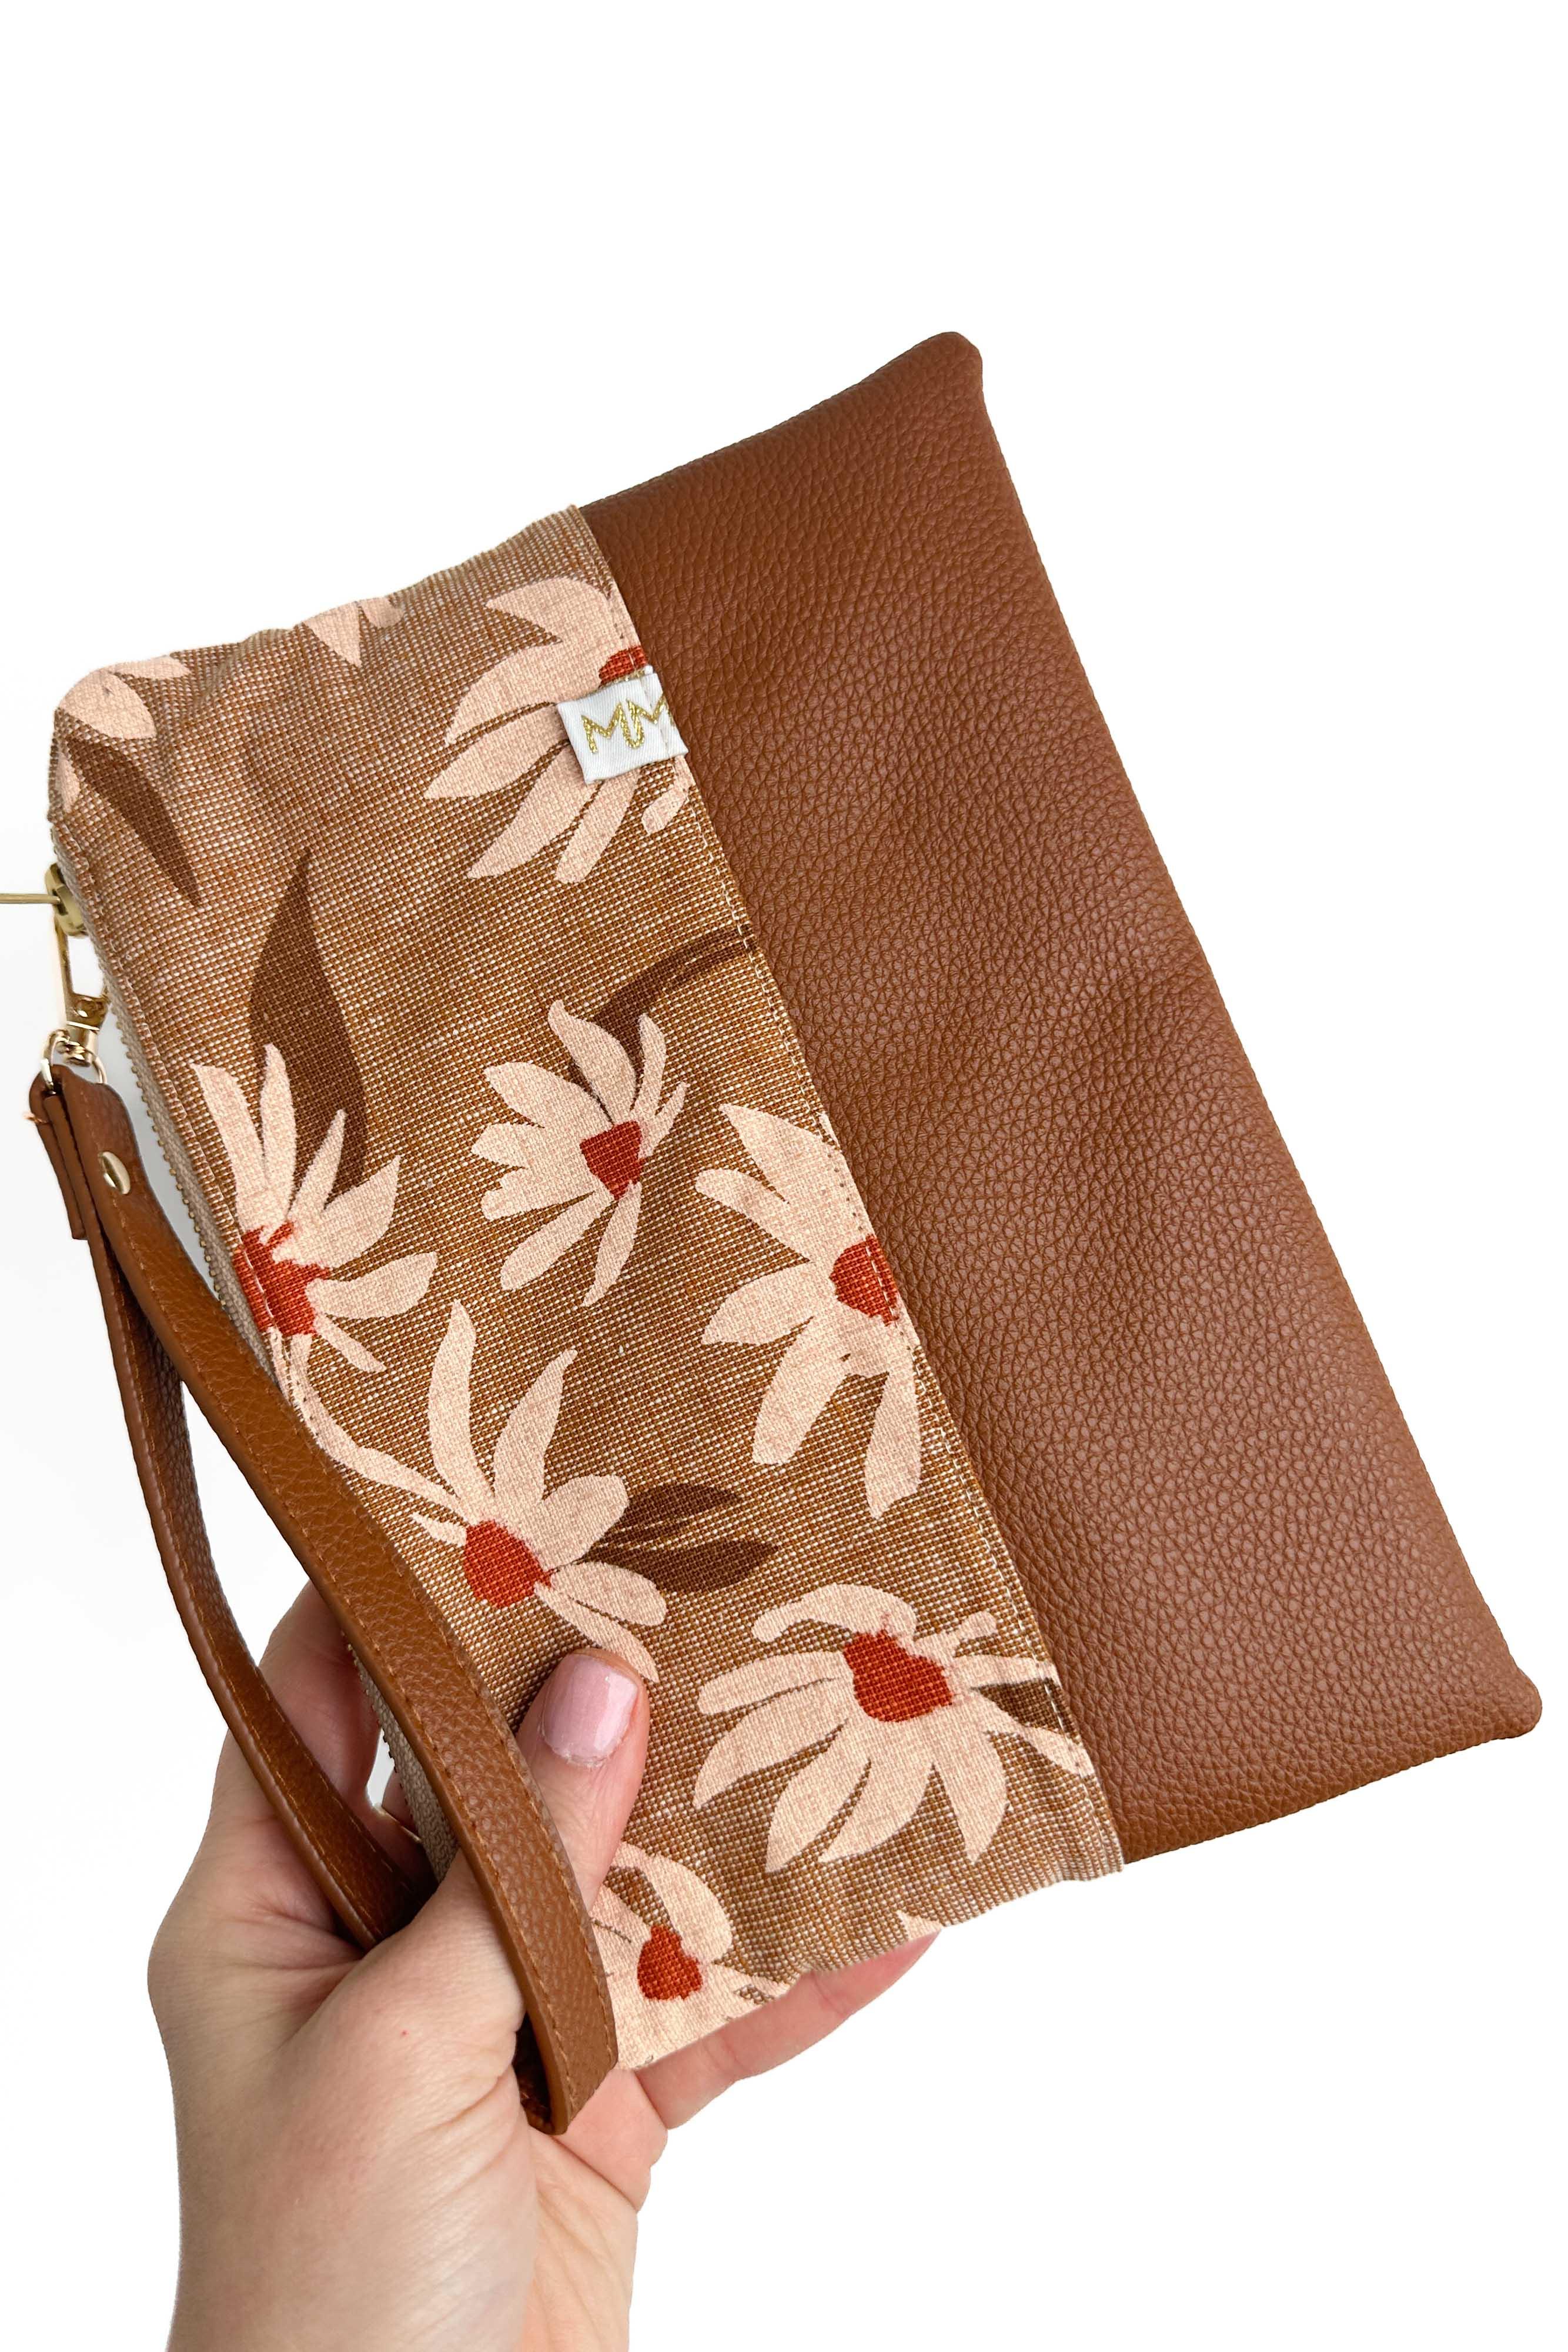 Boho Floral Convertible Crossbody Wristlet+ with Compartments READY TO SHIP - Modern Makerie